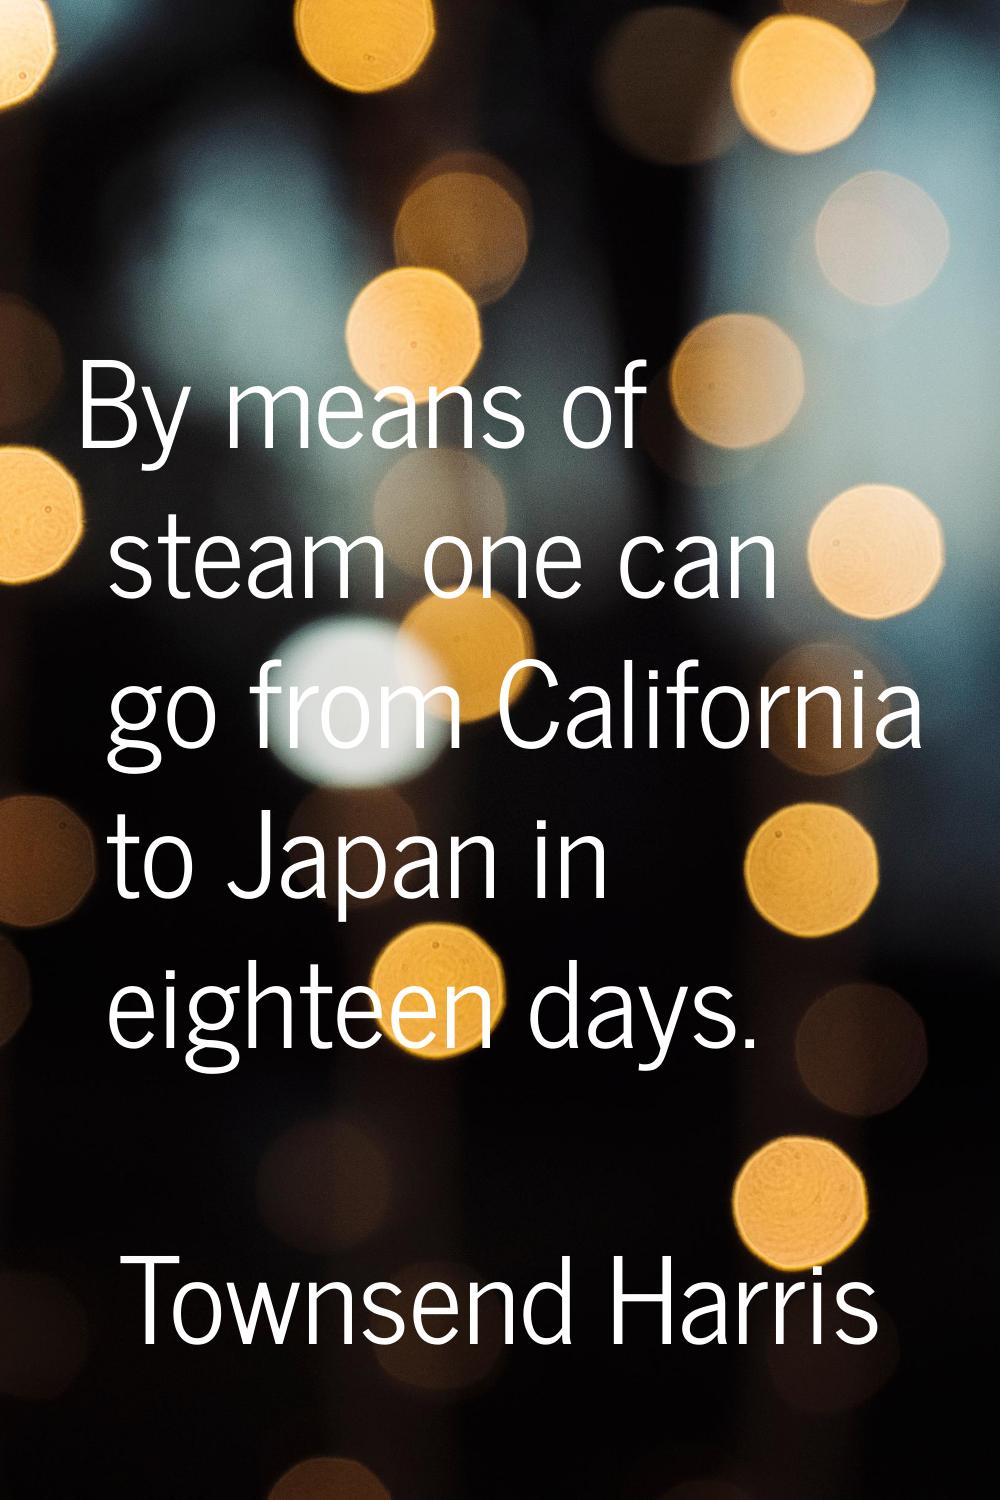 By means of steam one can go from California to Japan in eighteen days.